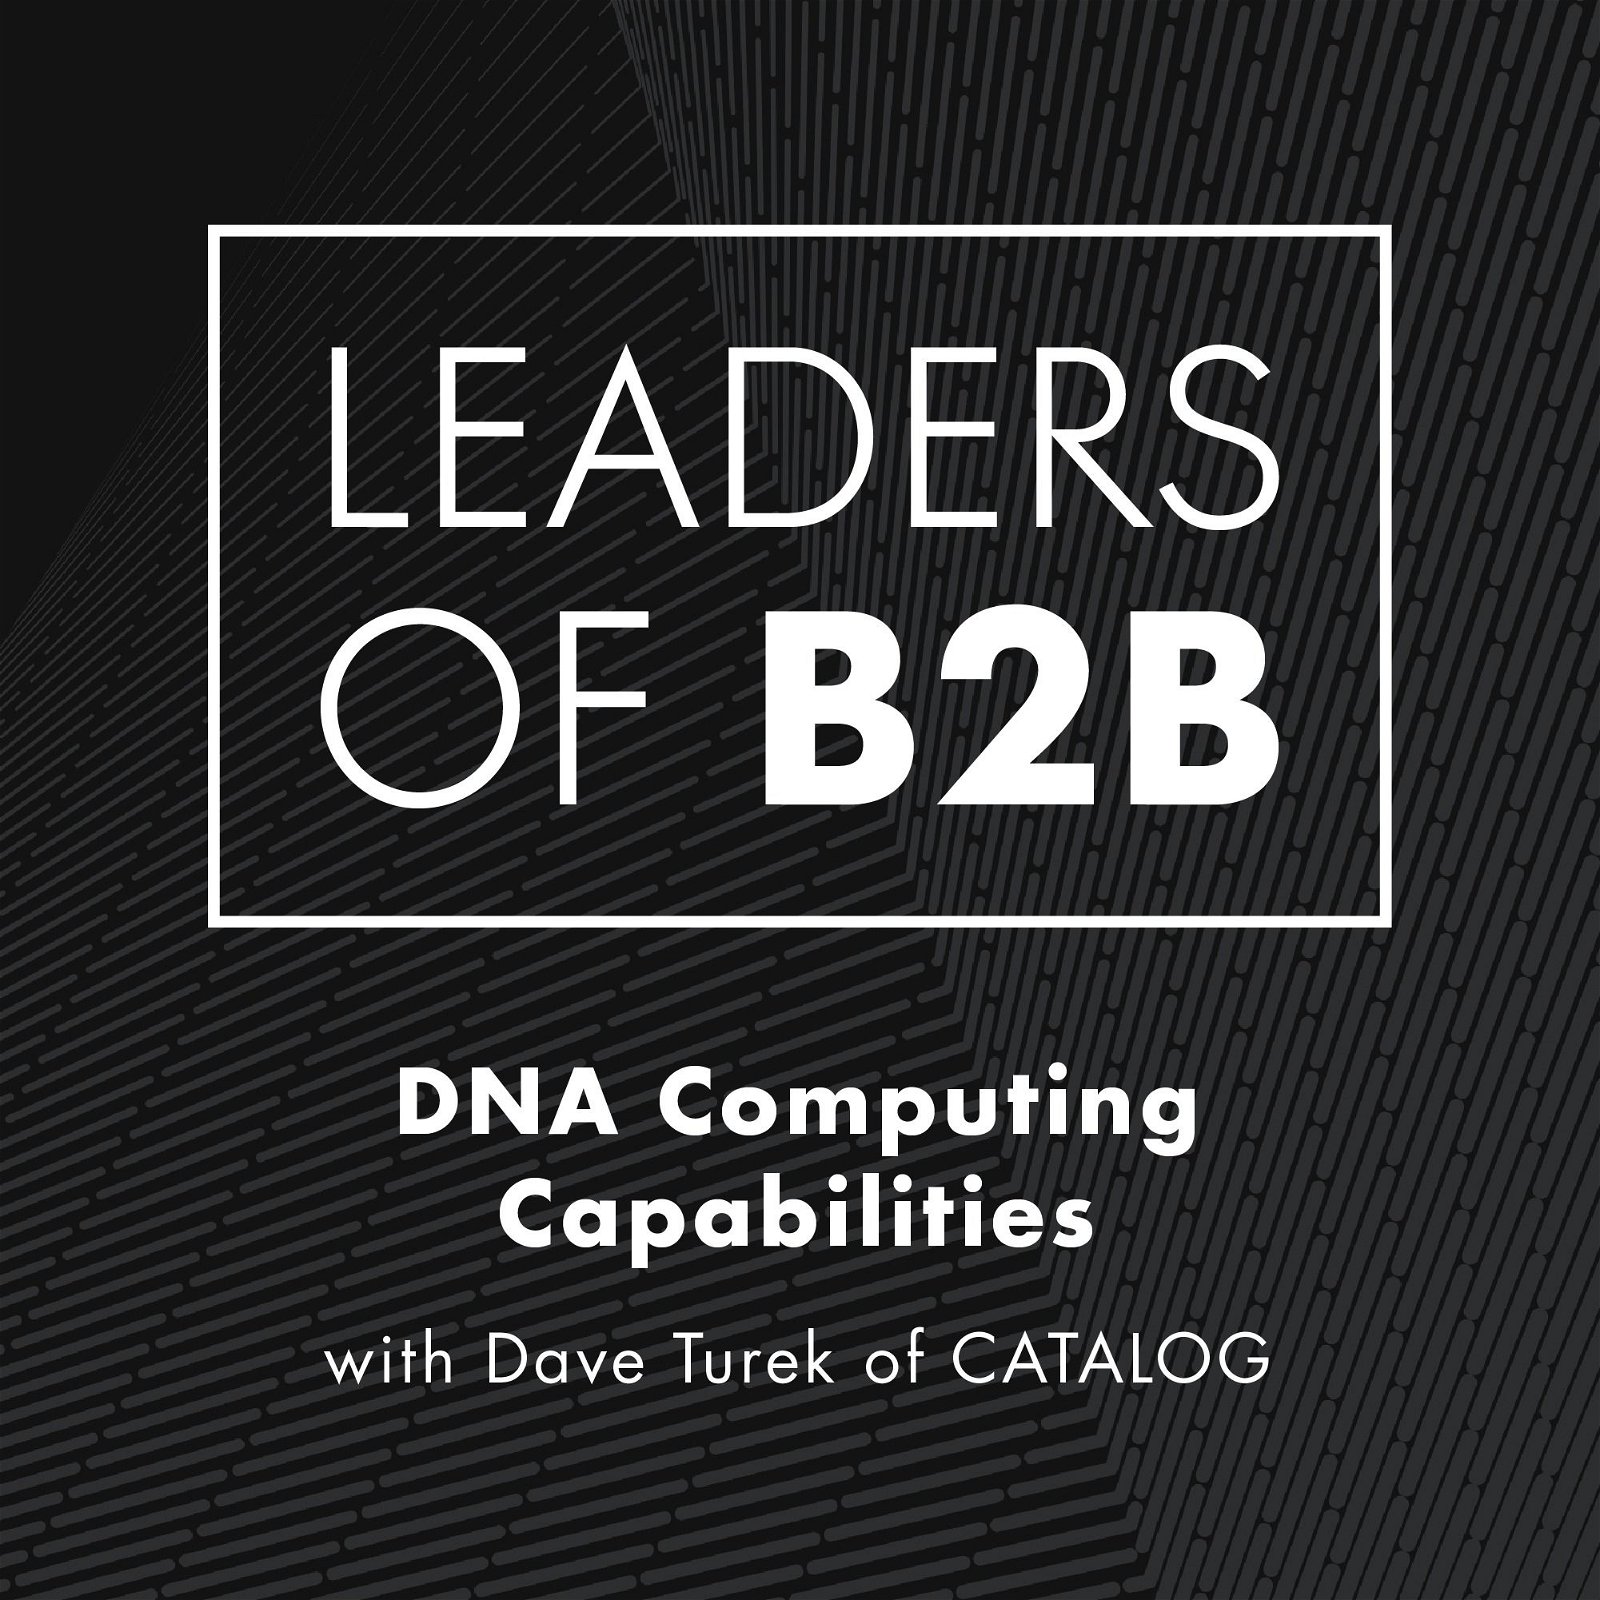 DNA Computing Capabilities with Dave Turek of CATALOG